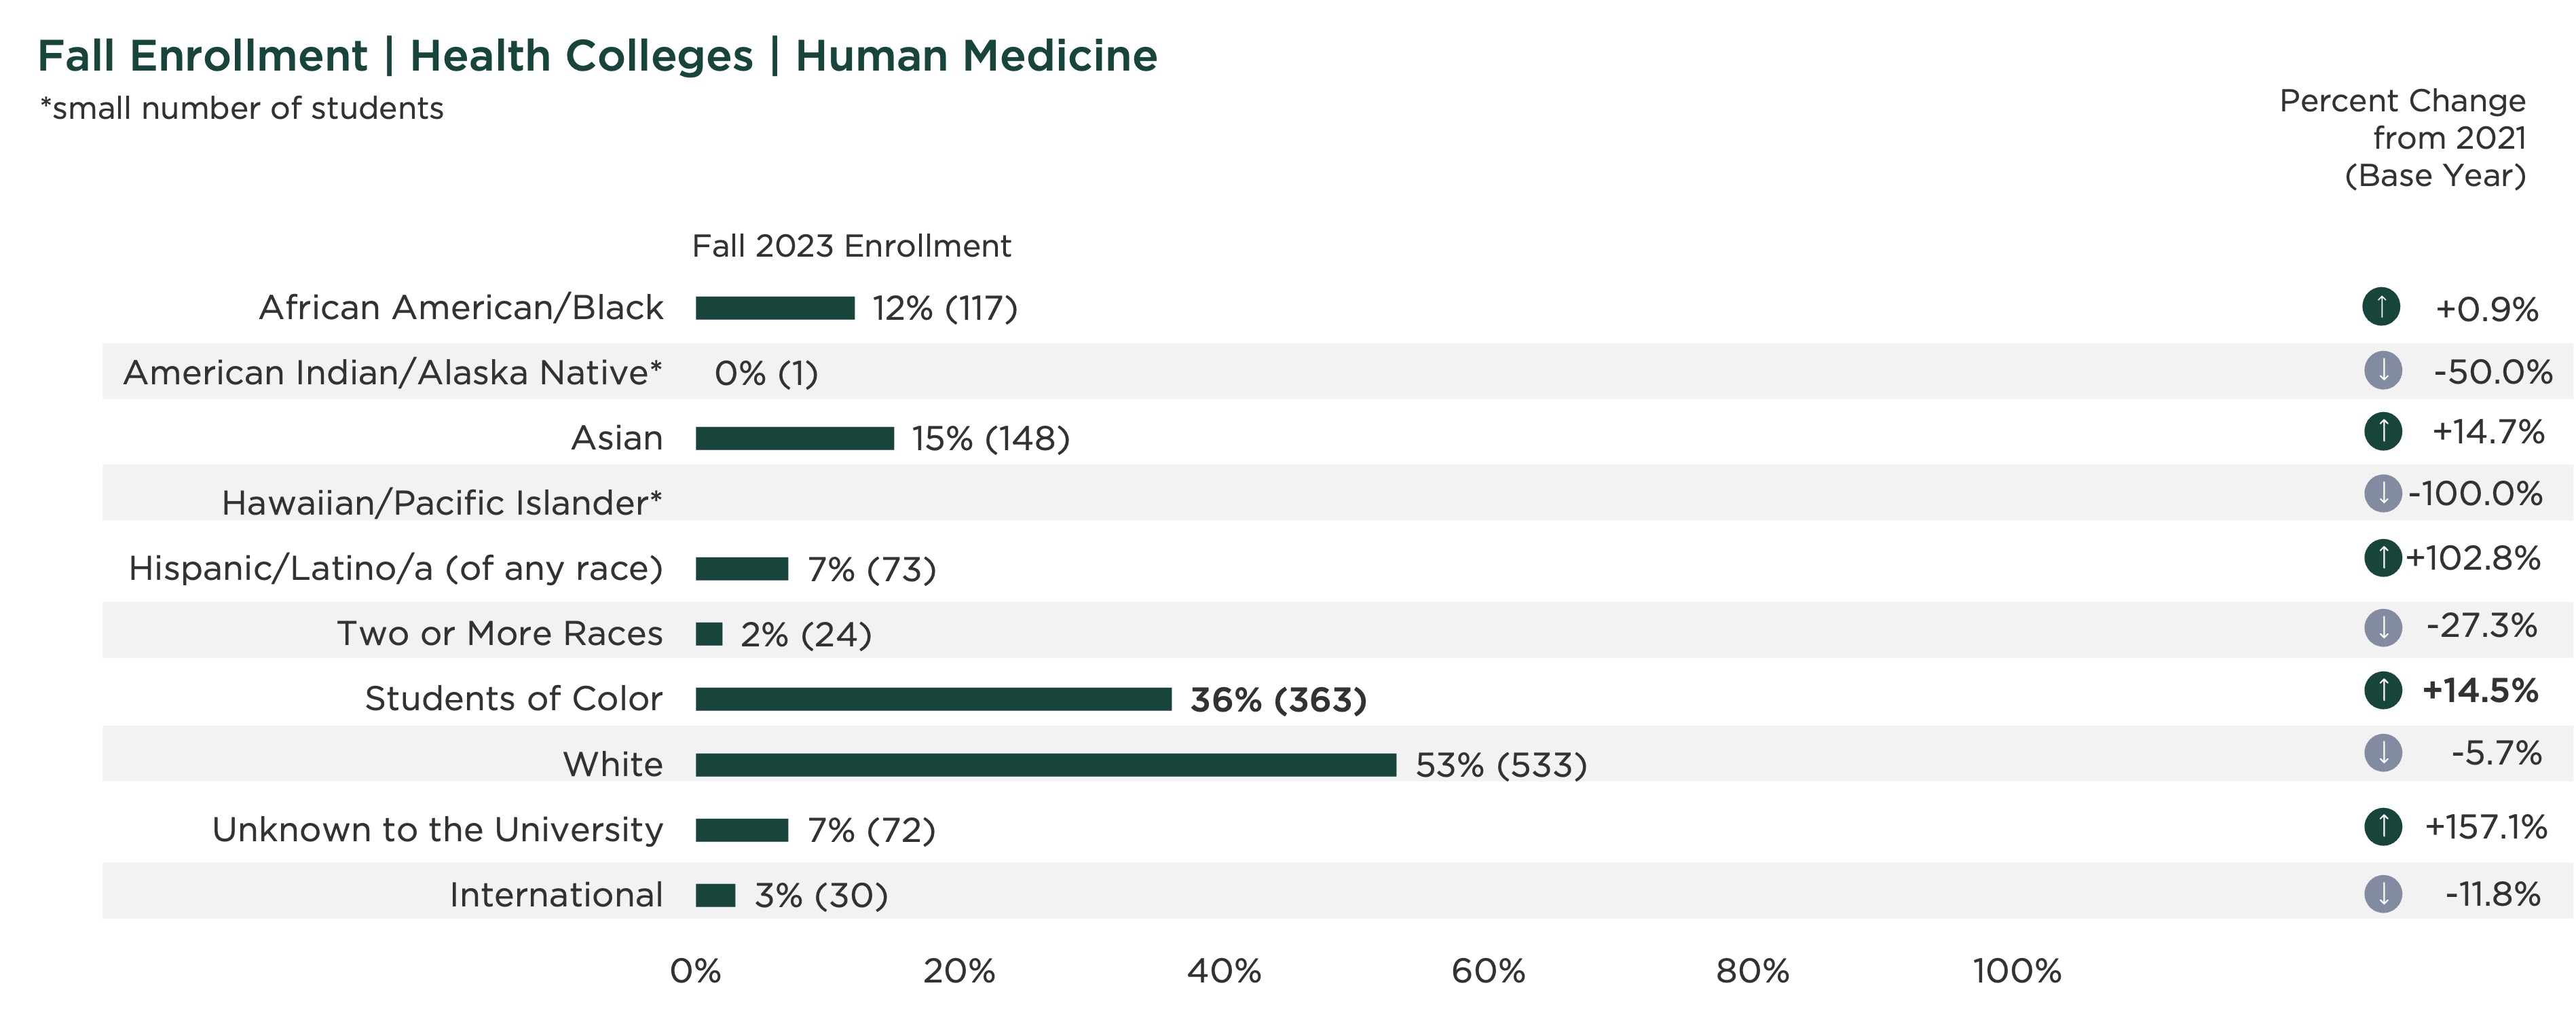 graph showing fall enrollment by race and ethnicity for the College of Human Medicine